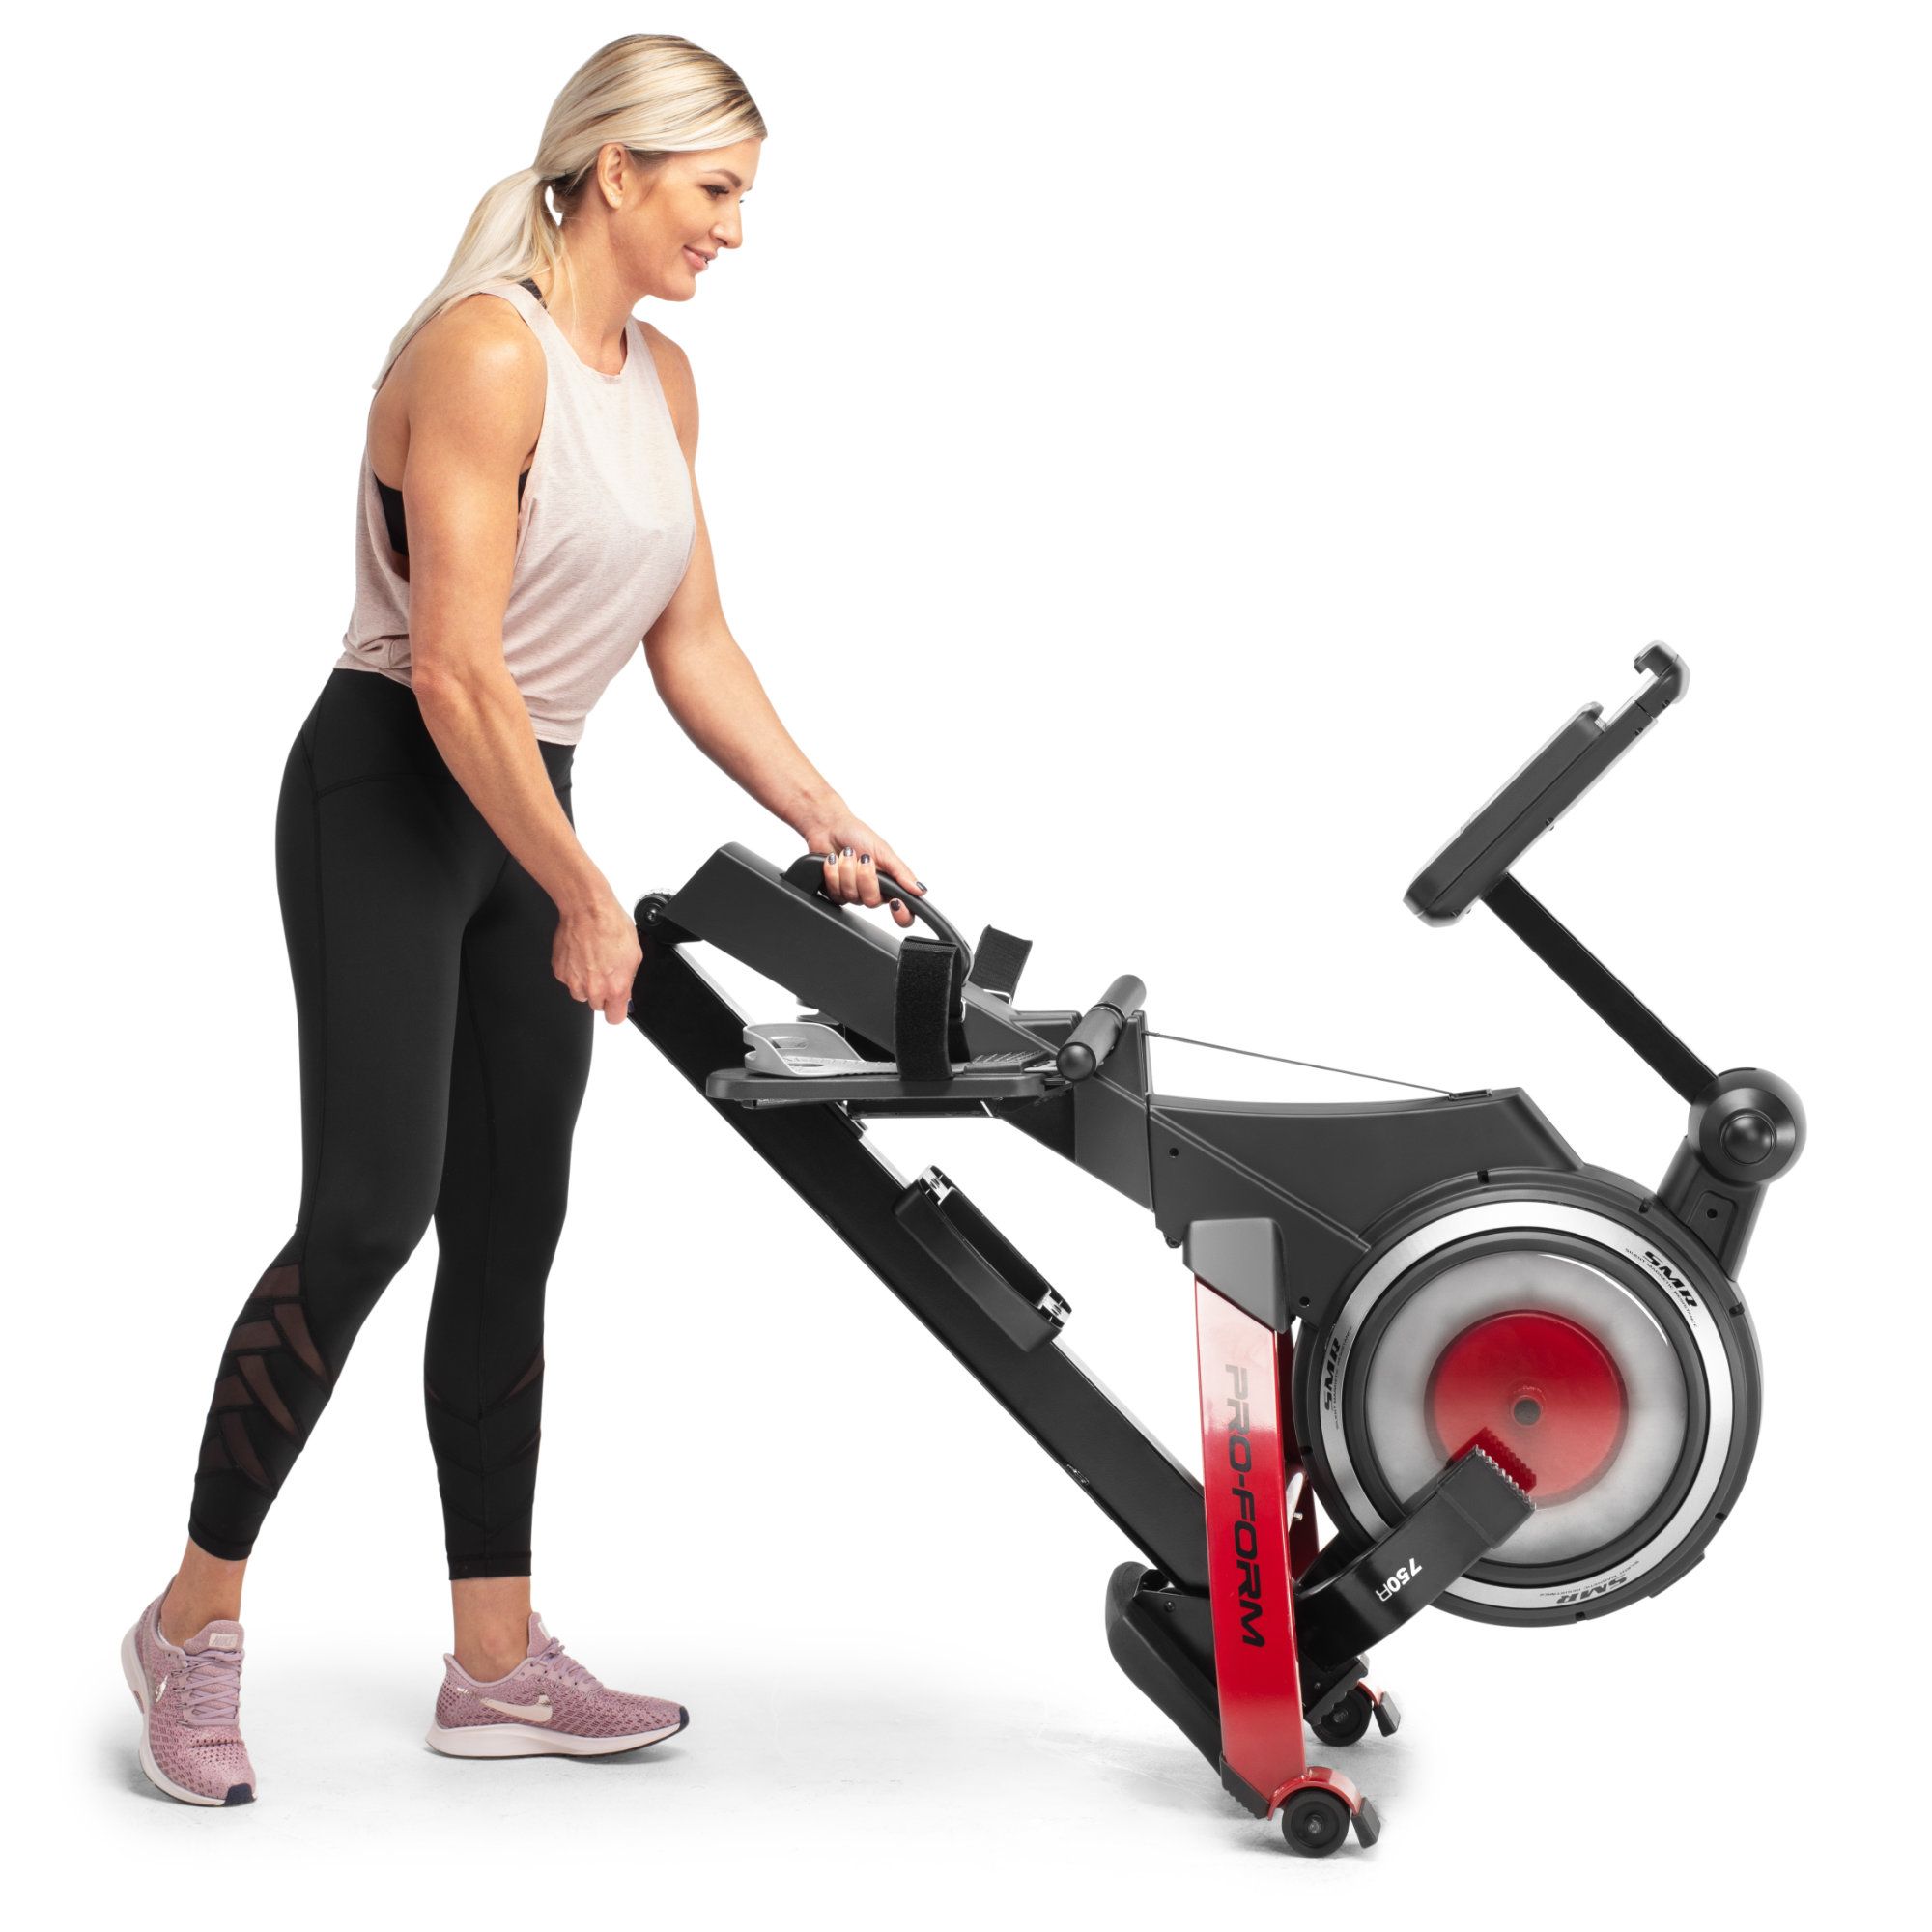 Everything About Rowing Machines – Advantages and Disadvantages